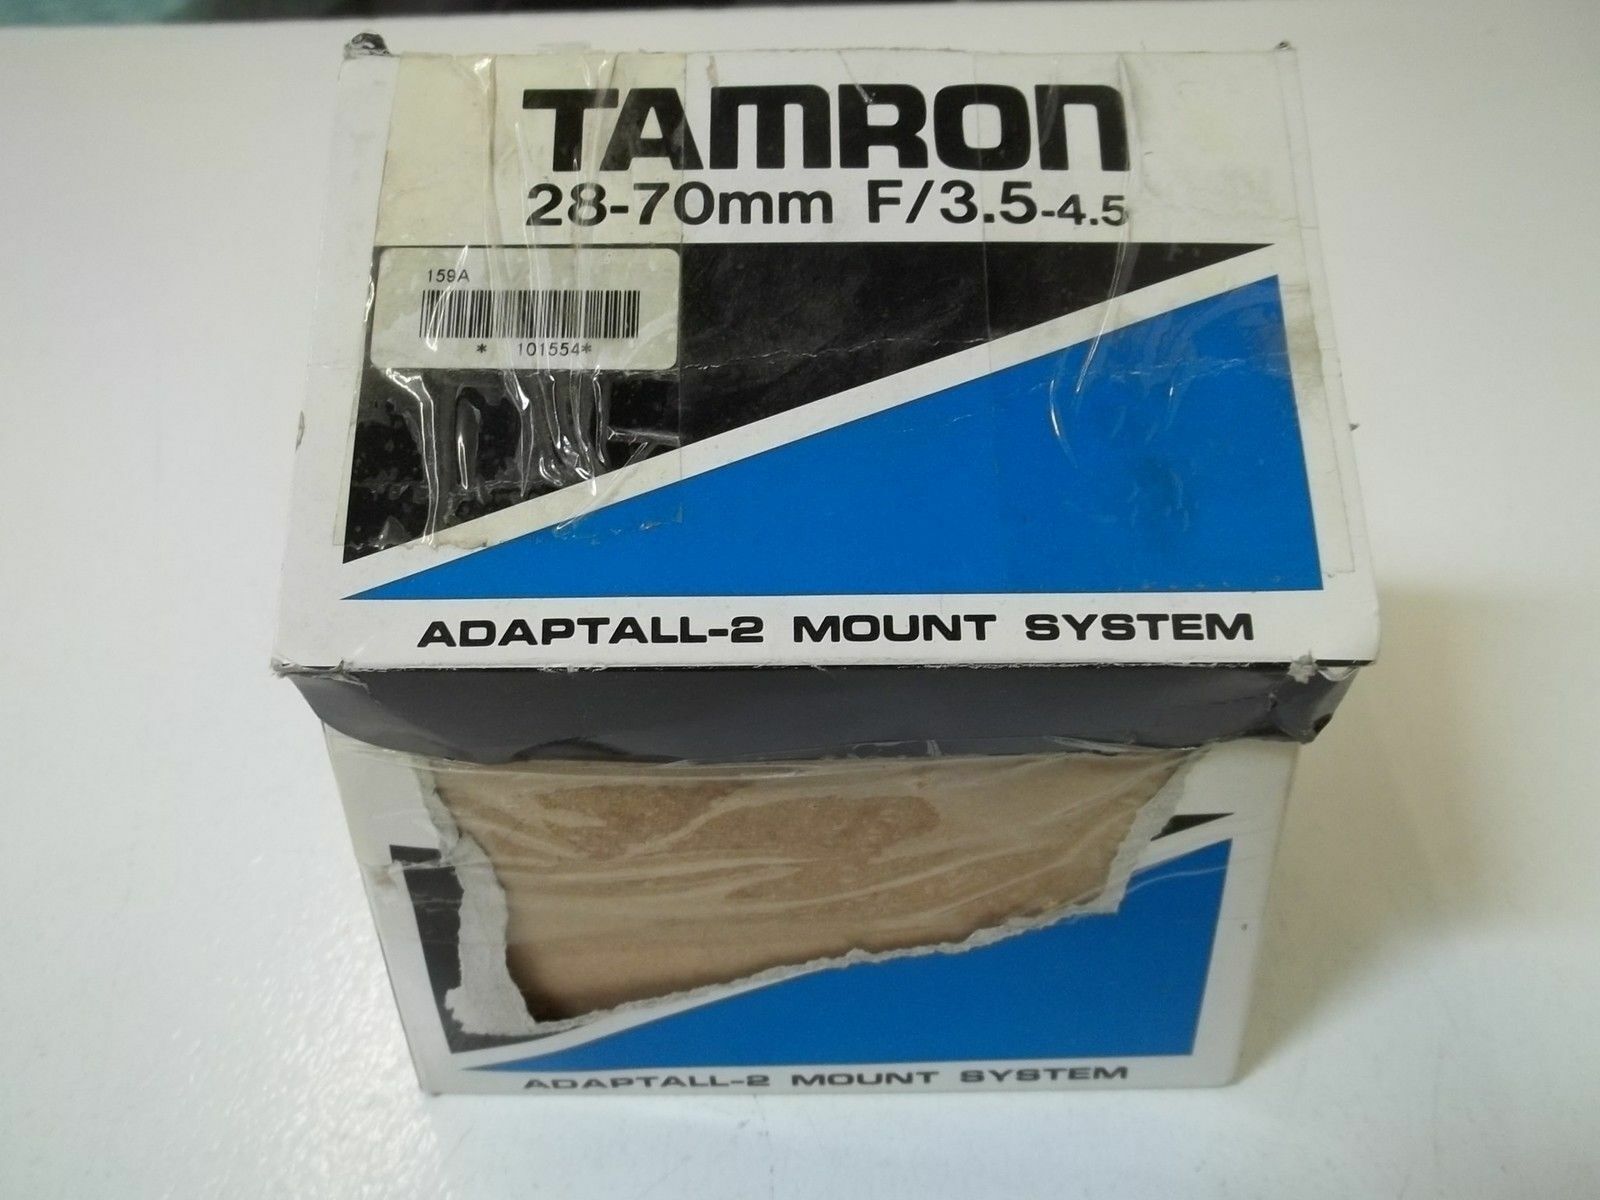 TAMRON 159A 2870MM F/3.5-4.5 ZOOM LENS *NEW IN BOX*